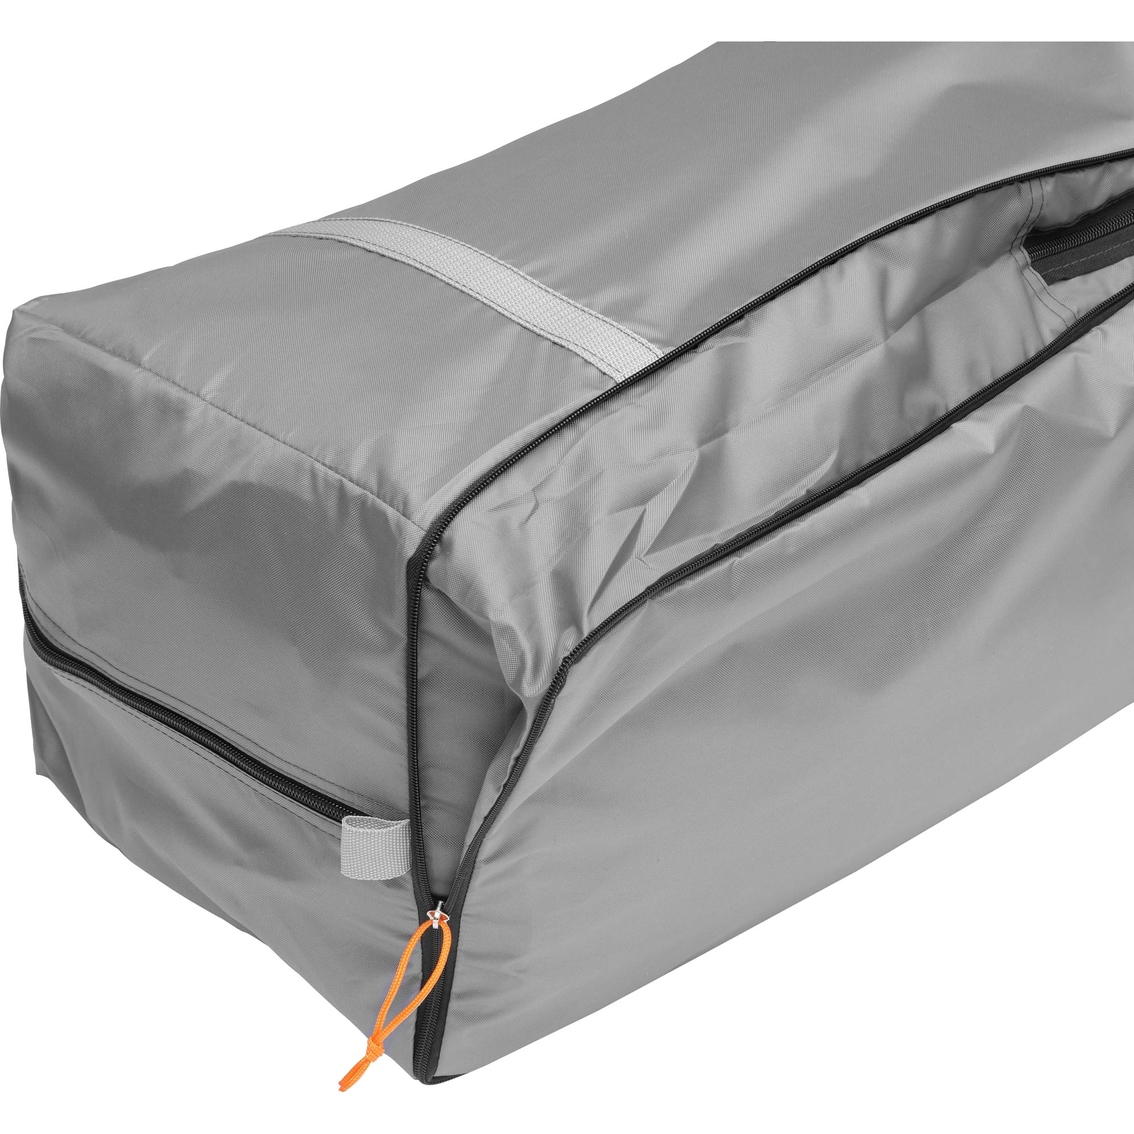 Core Equipment 11 Person Cabin Tent with Screen Room - Image 10 of 10